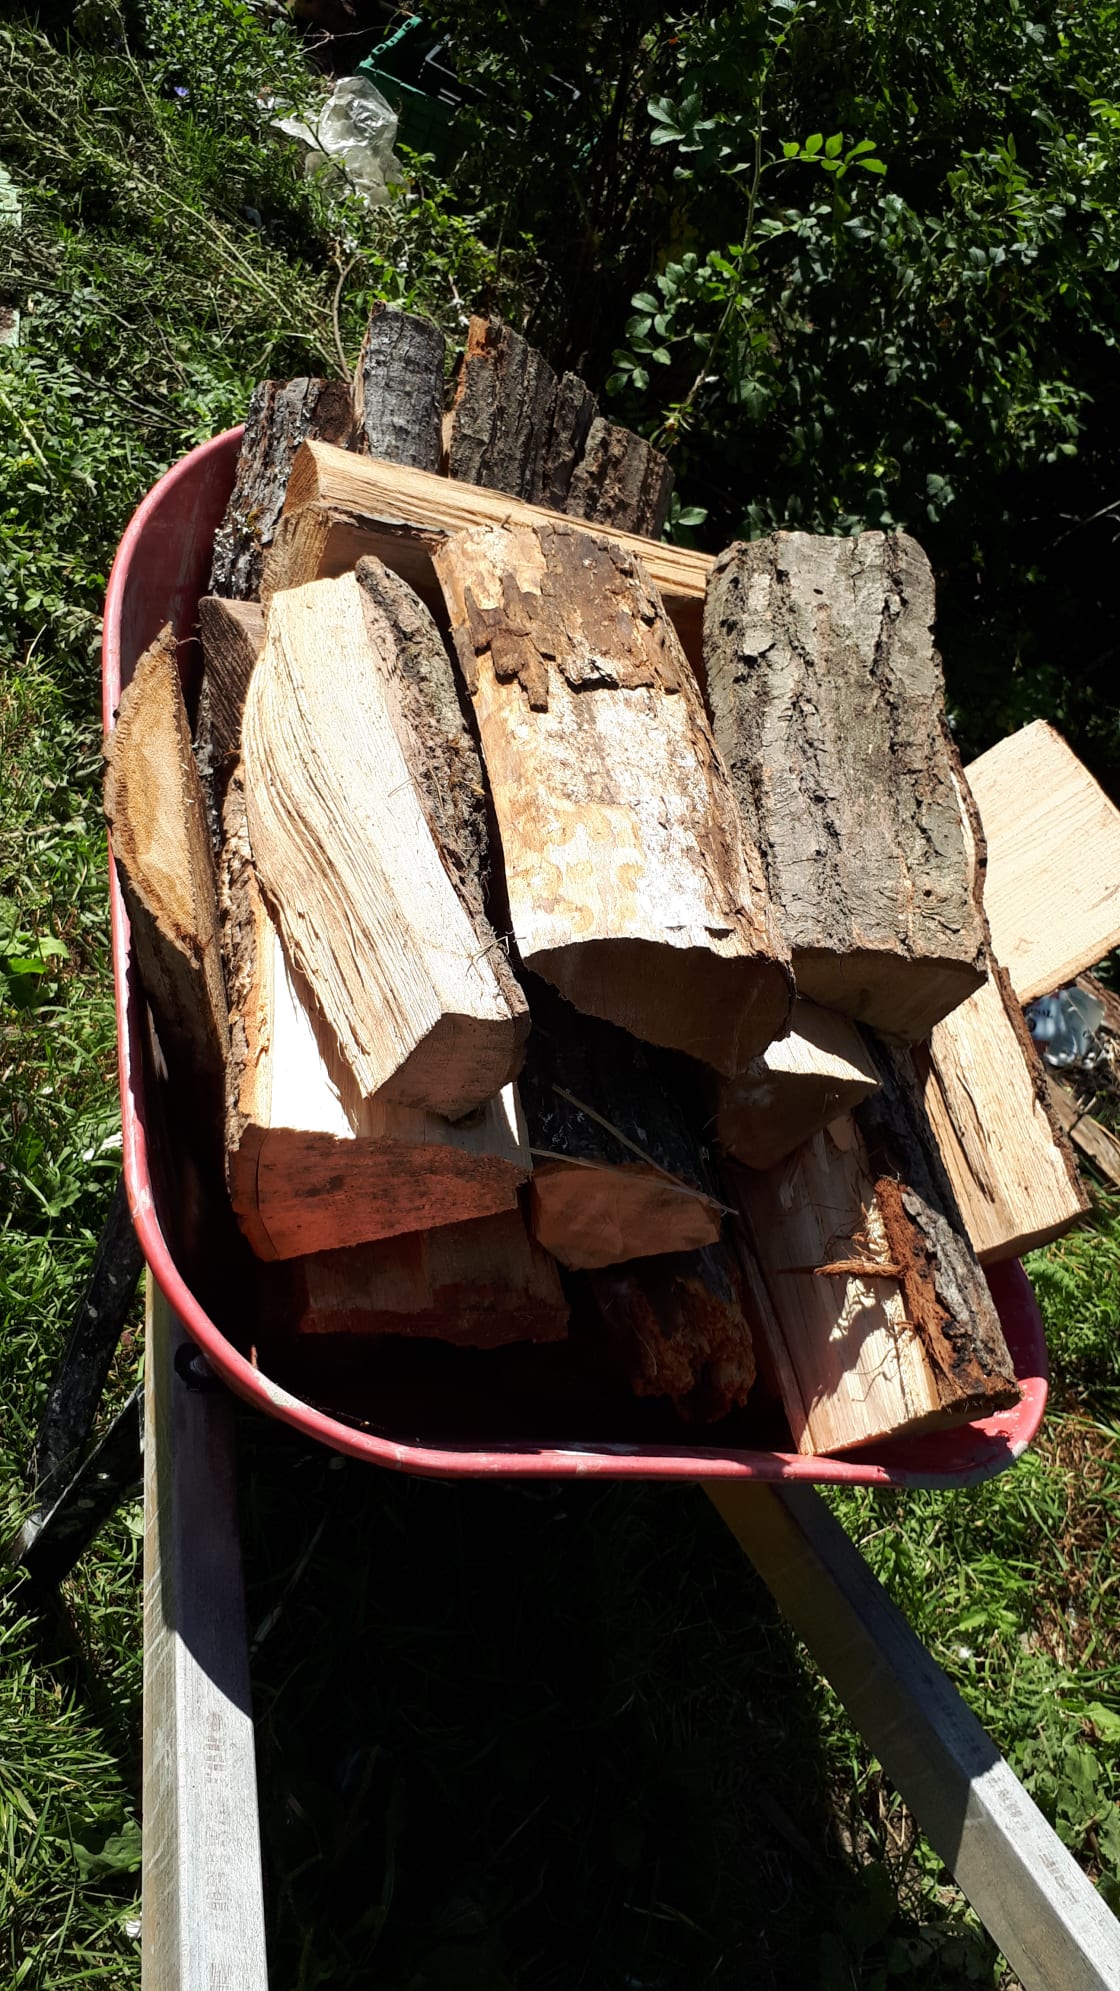 Hardwood available for 20$ a wheel barrow. For weekly rentals the first one is free.